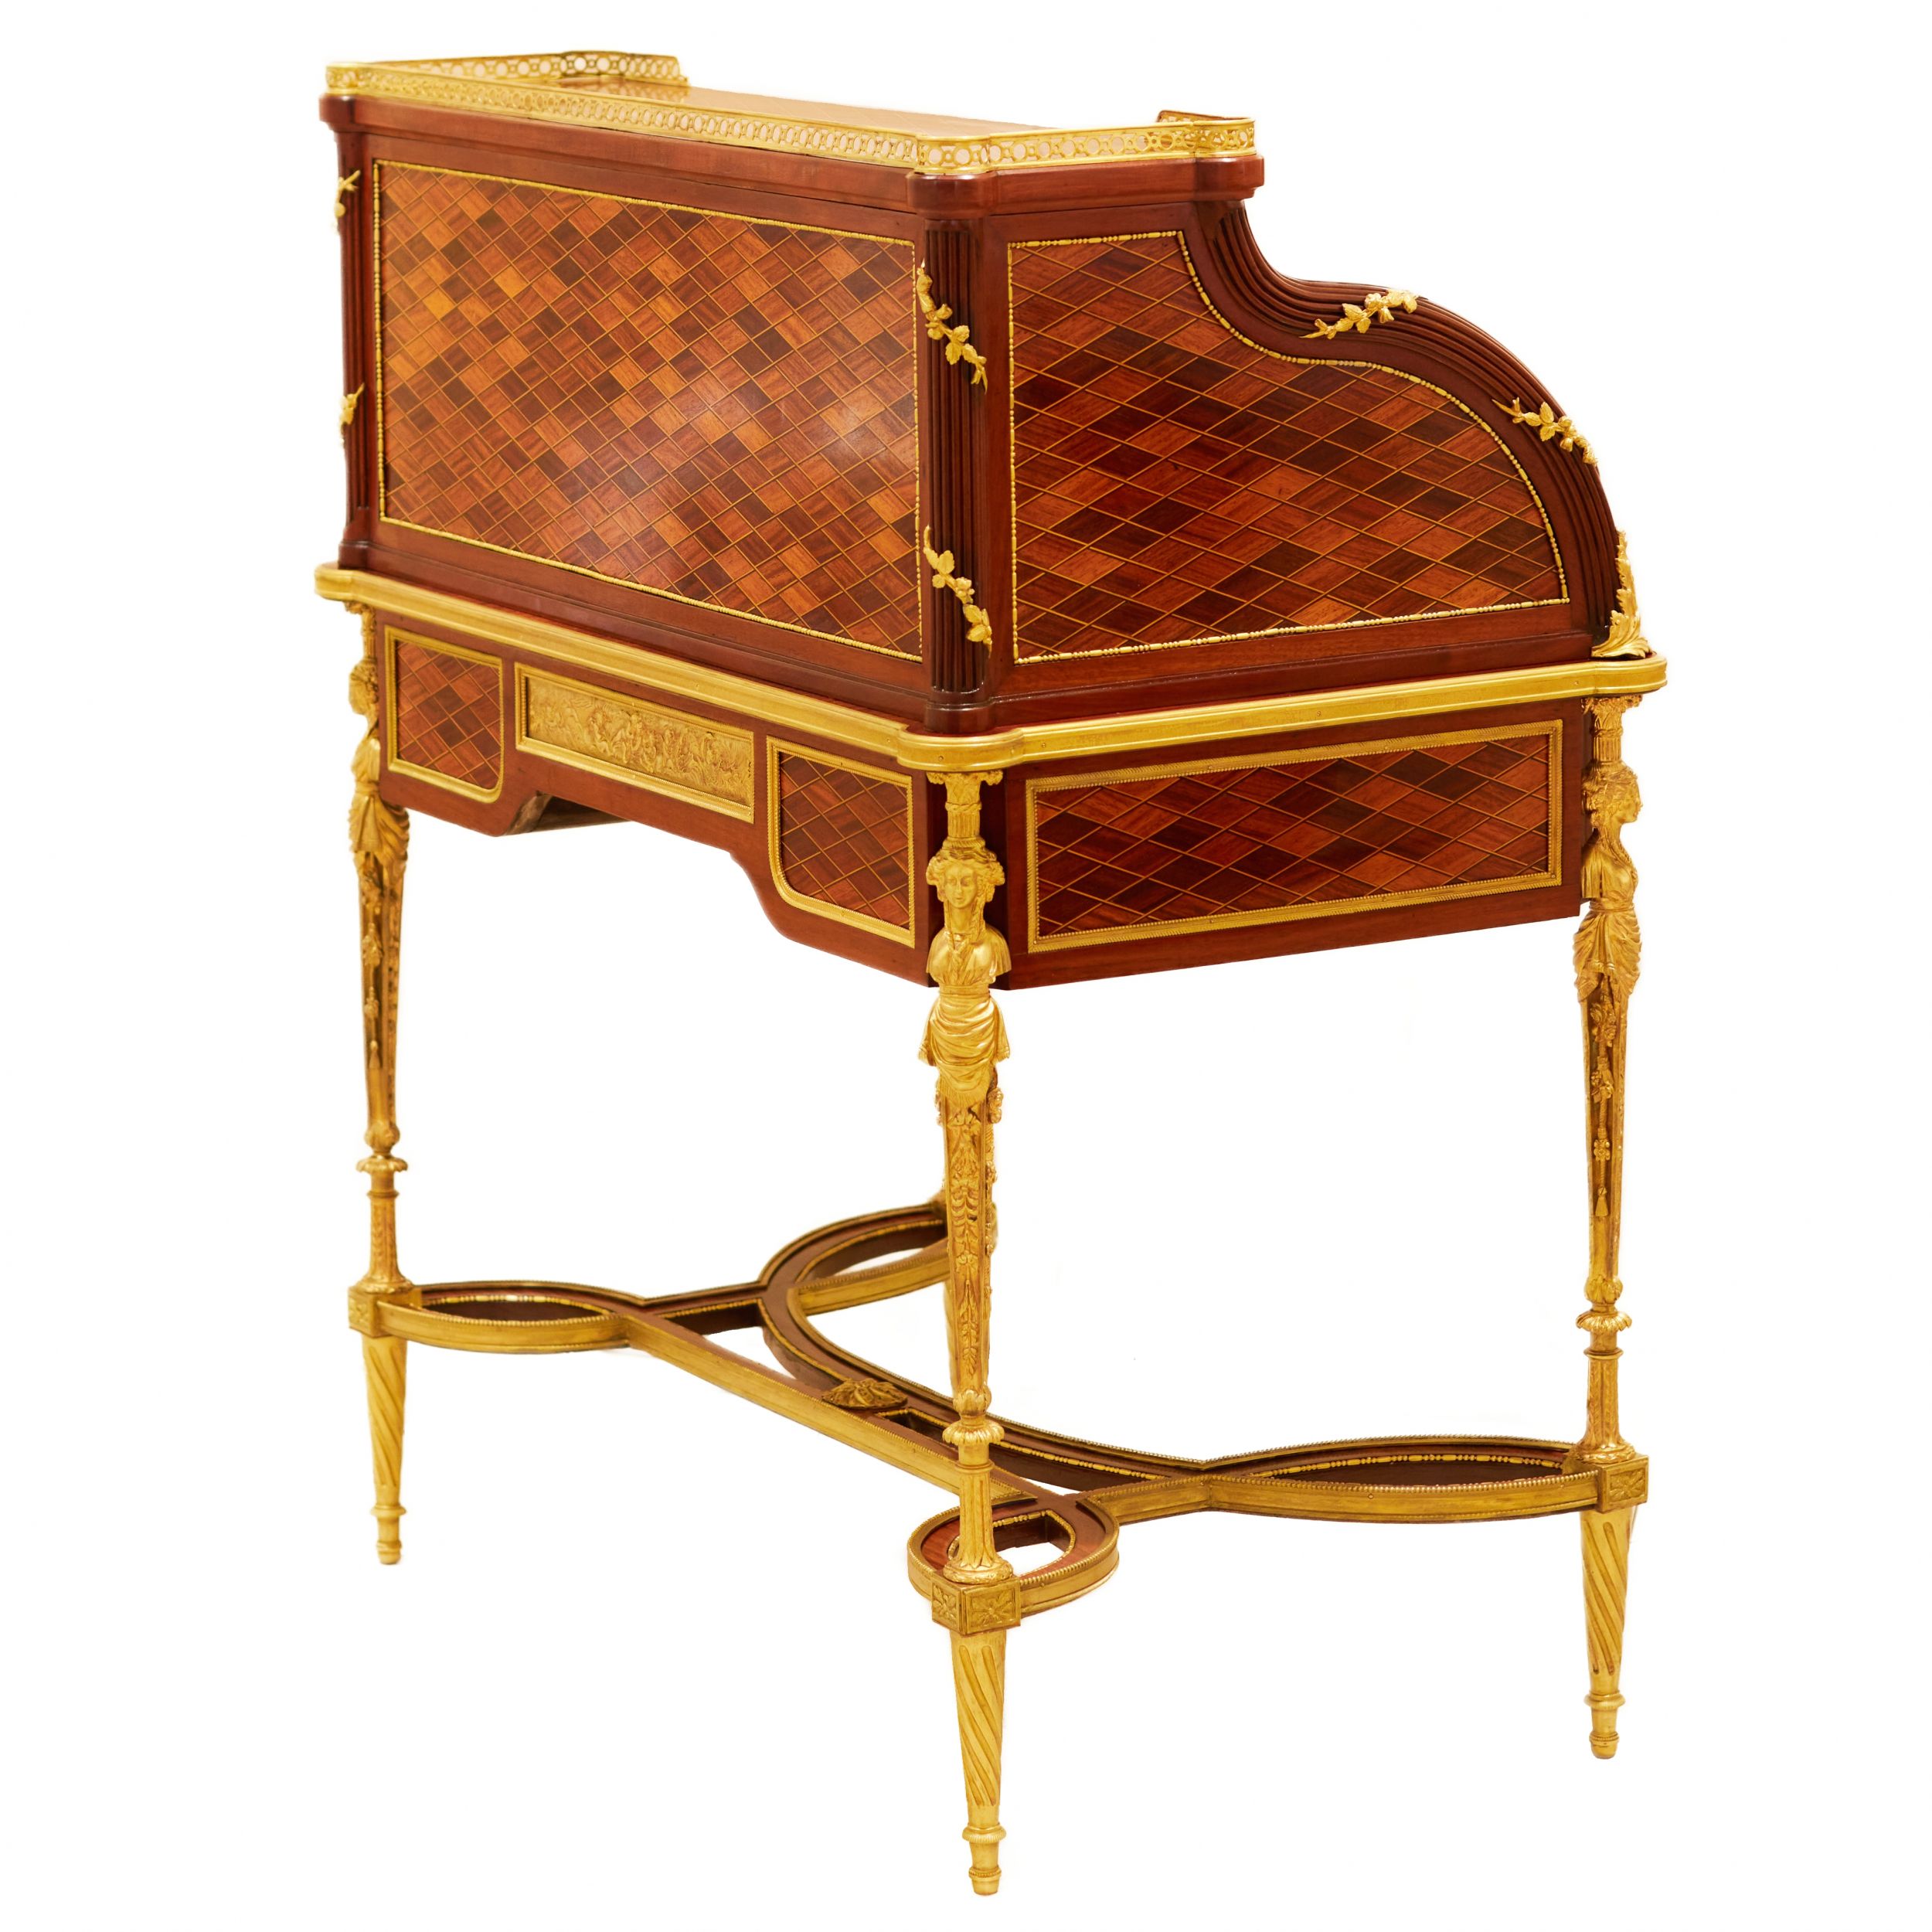 E.KAHN. A magnificent cylindrical bureau in mahogany and satin wood with gilt bronze. - Image 10 of 14